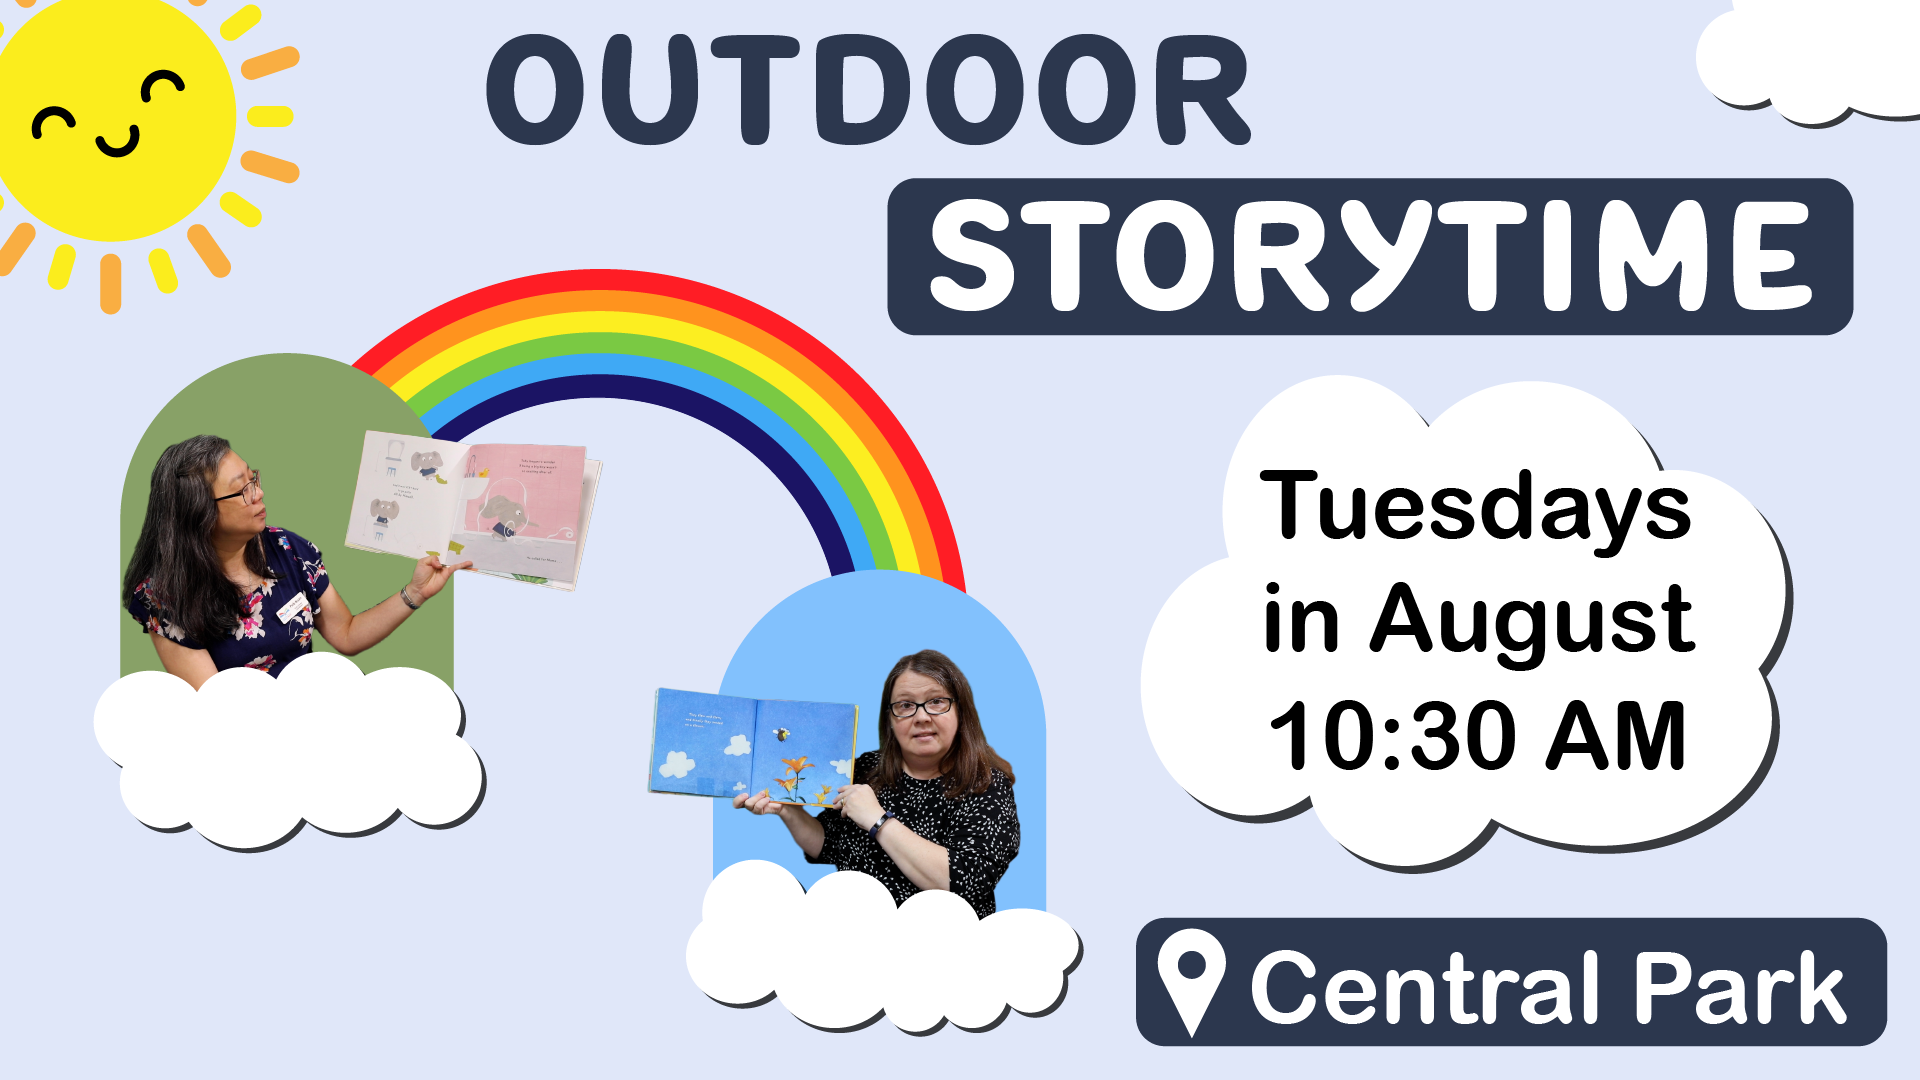 Outdoor storytime, Tuesdays in August at 10:30 AM, at Central Park